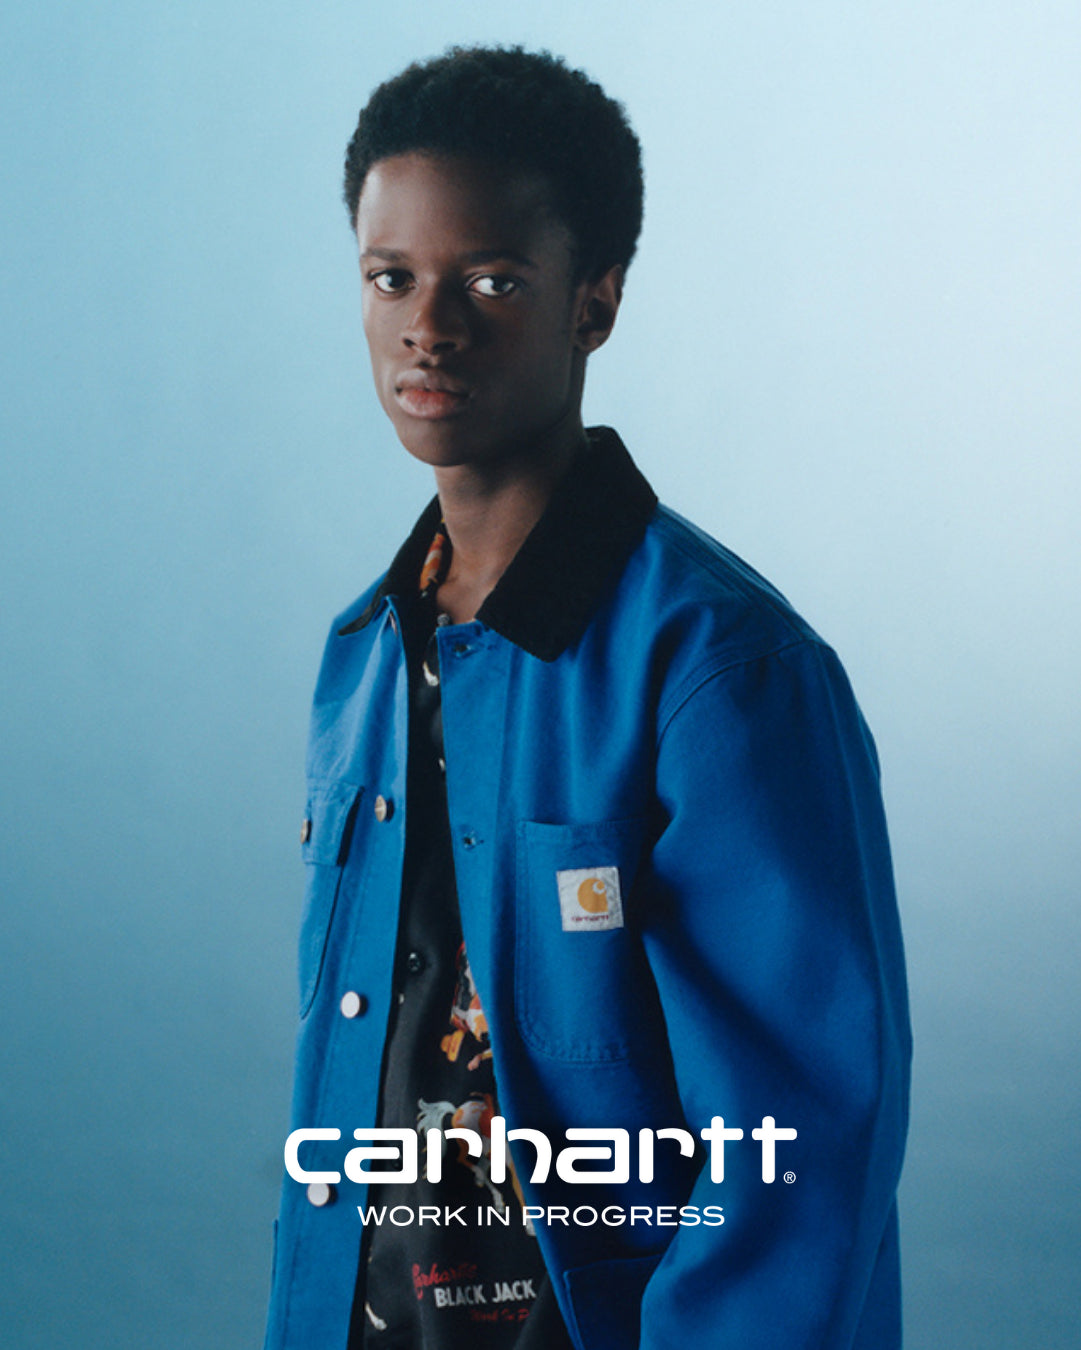 https://www.707.co.id/collections/carhartt